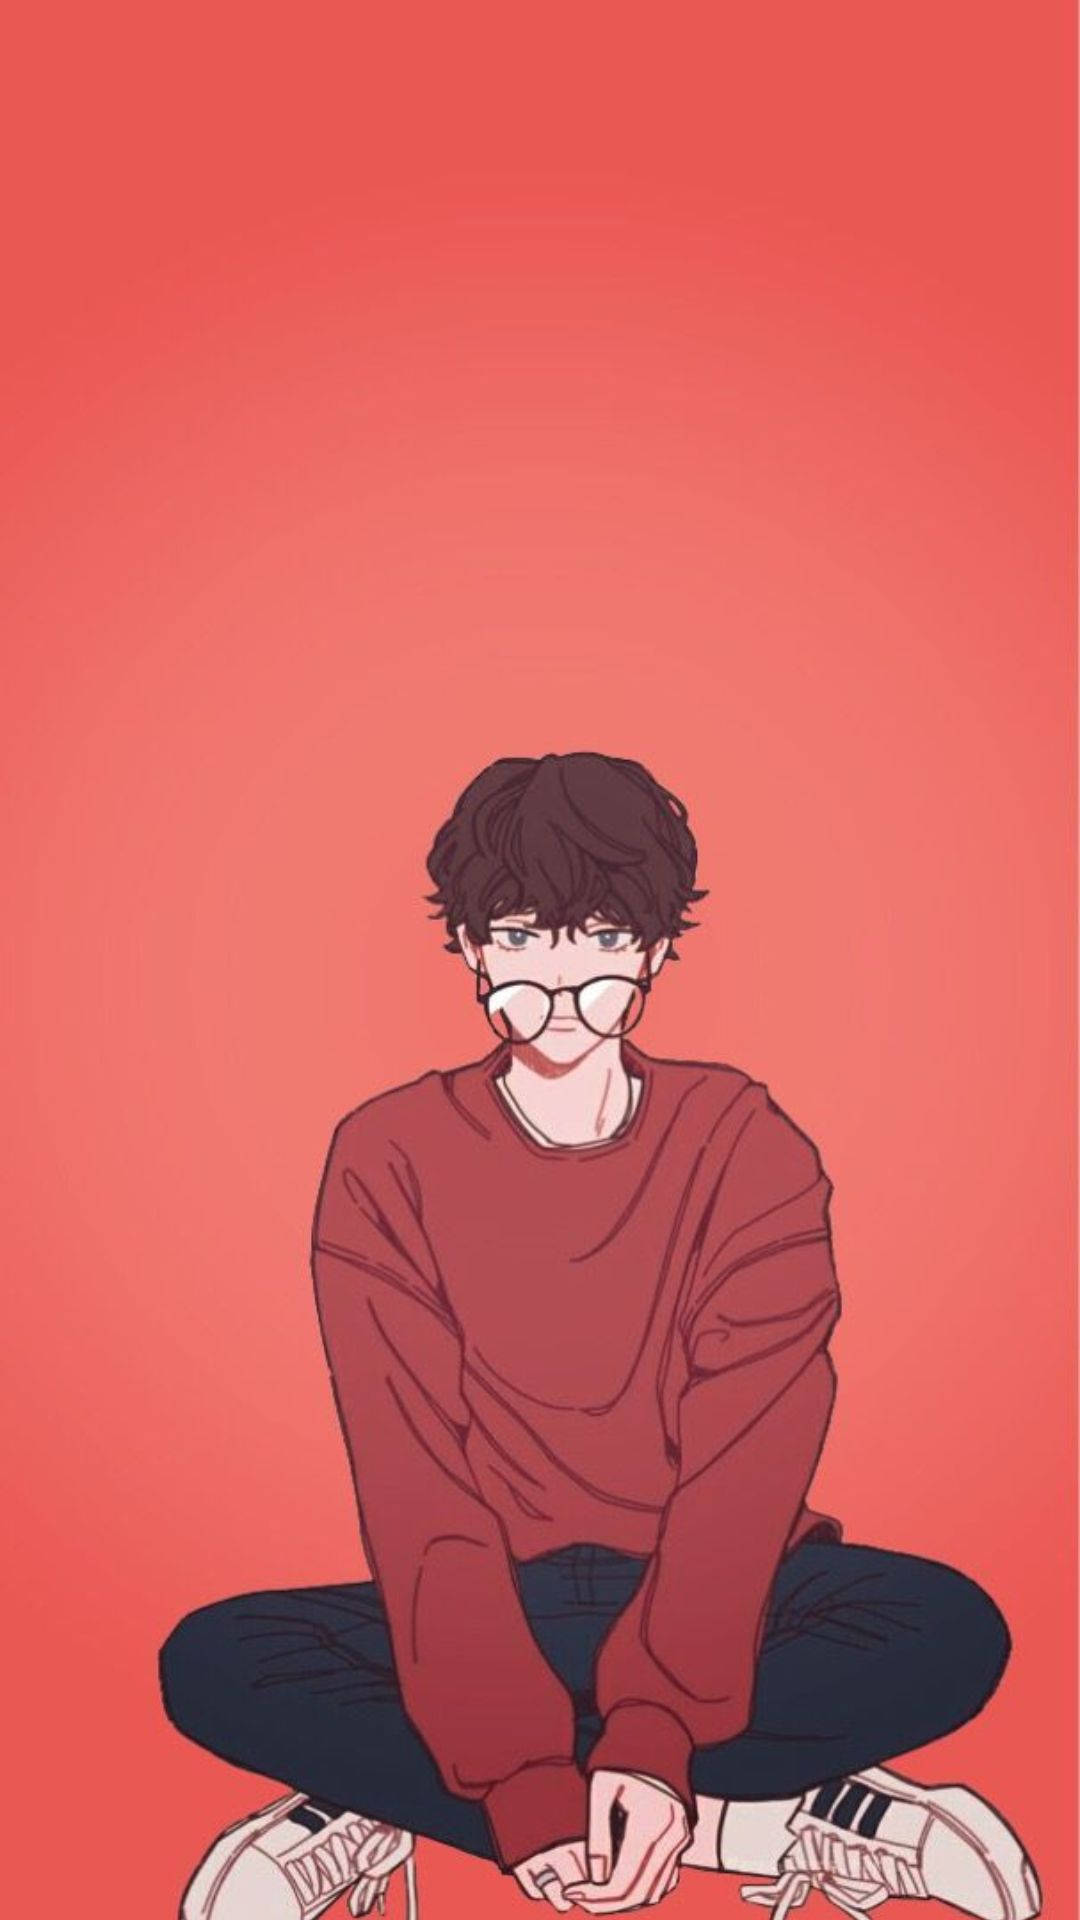 Download Aesthetic Anime Boy Red Orange Background Wallpaper | Wallpapers .com